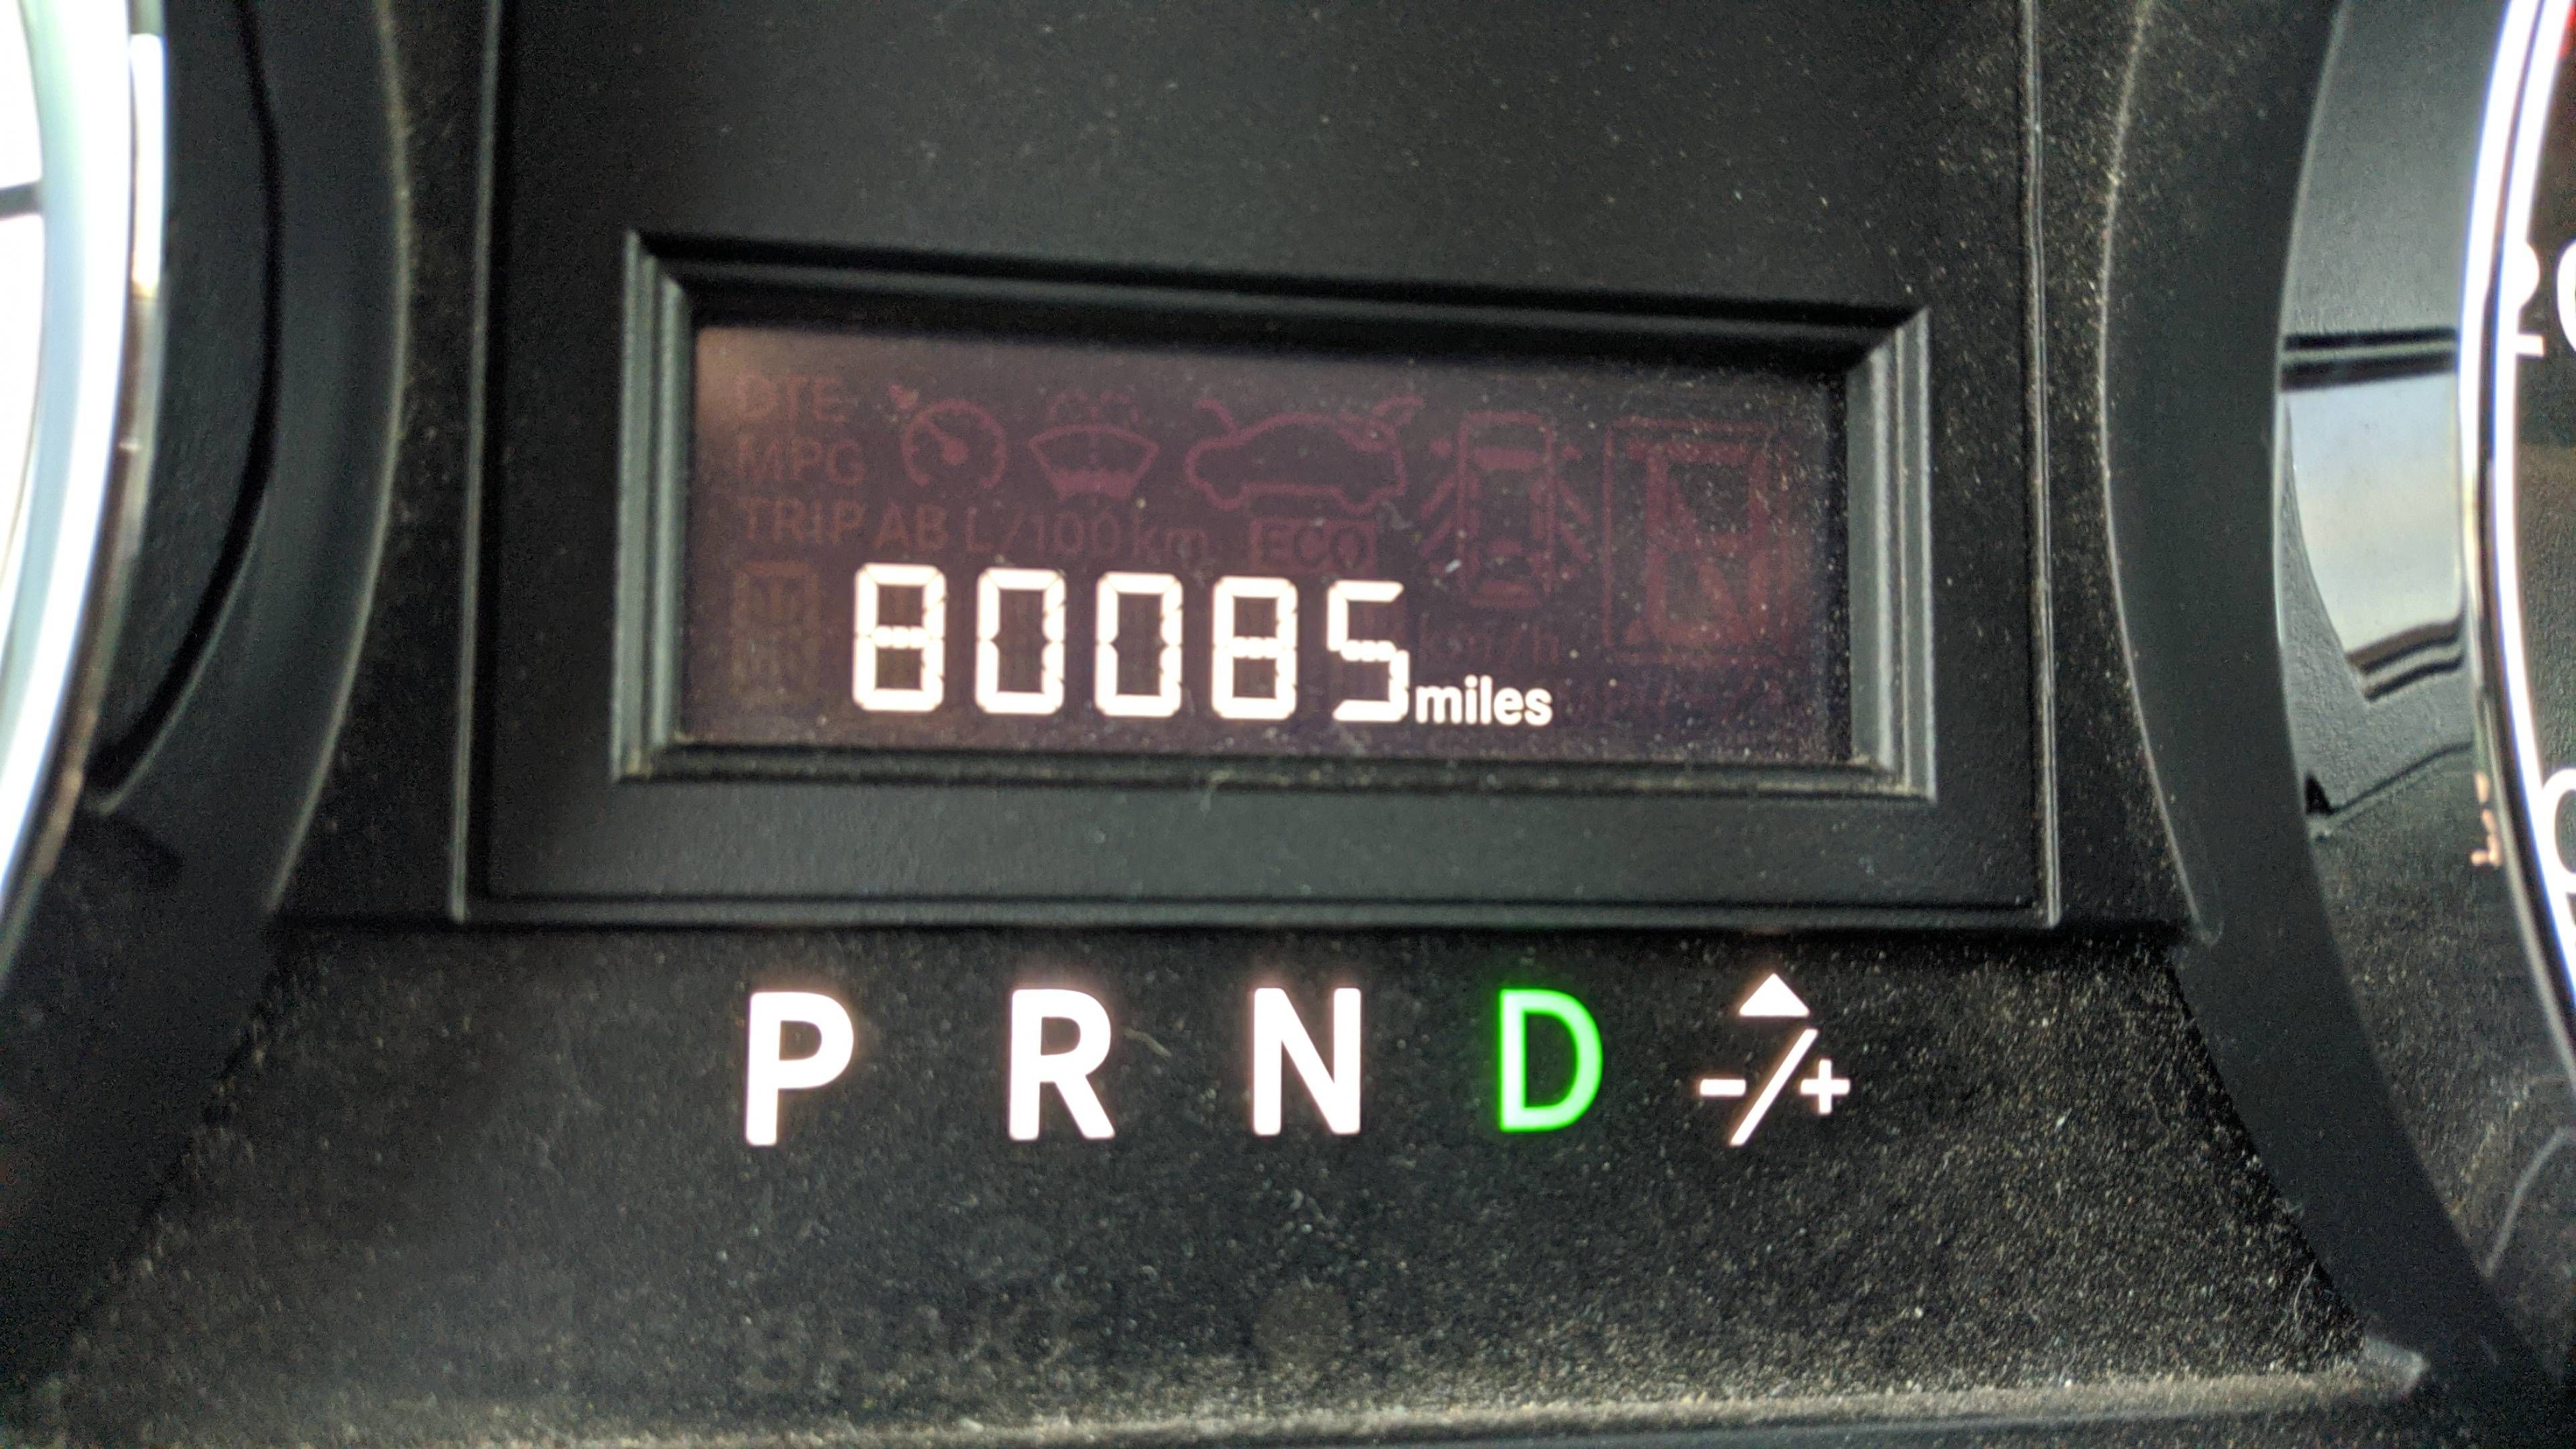 My car reached an important milestone today.